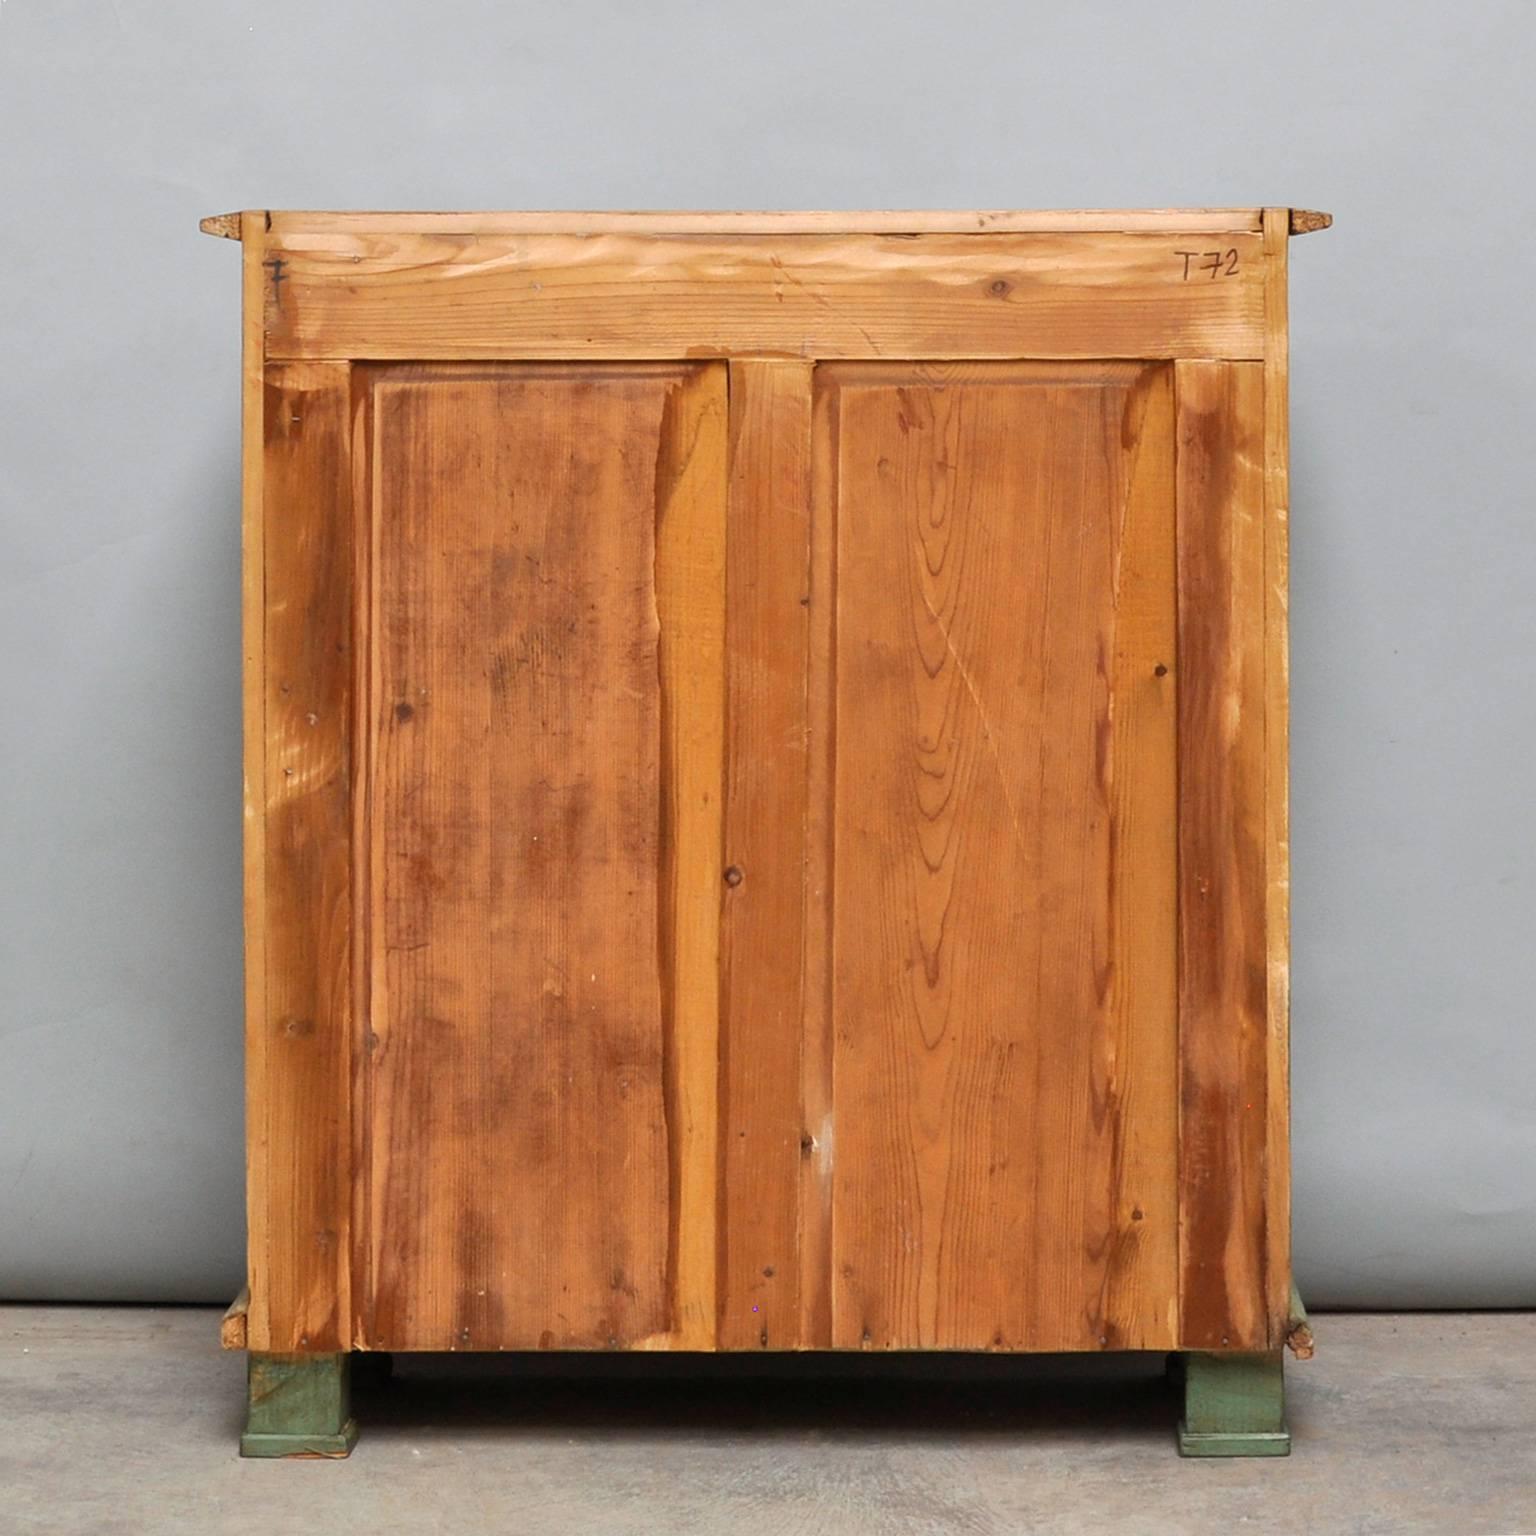 Hungarian Small Vintage Pine Cabinet, 1930s